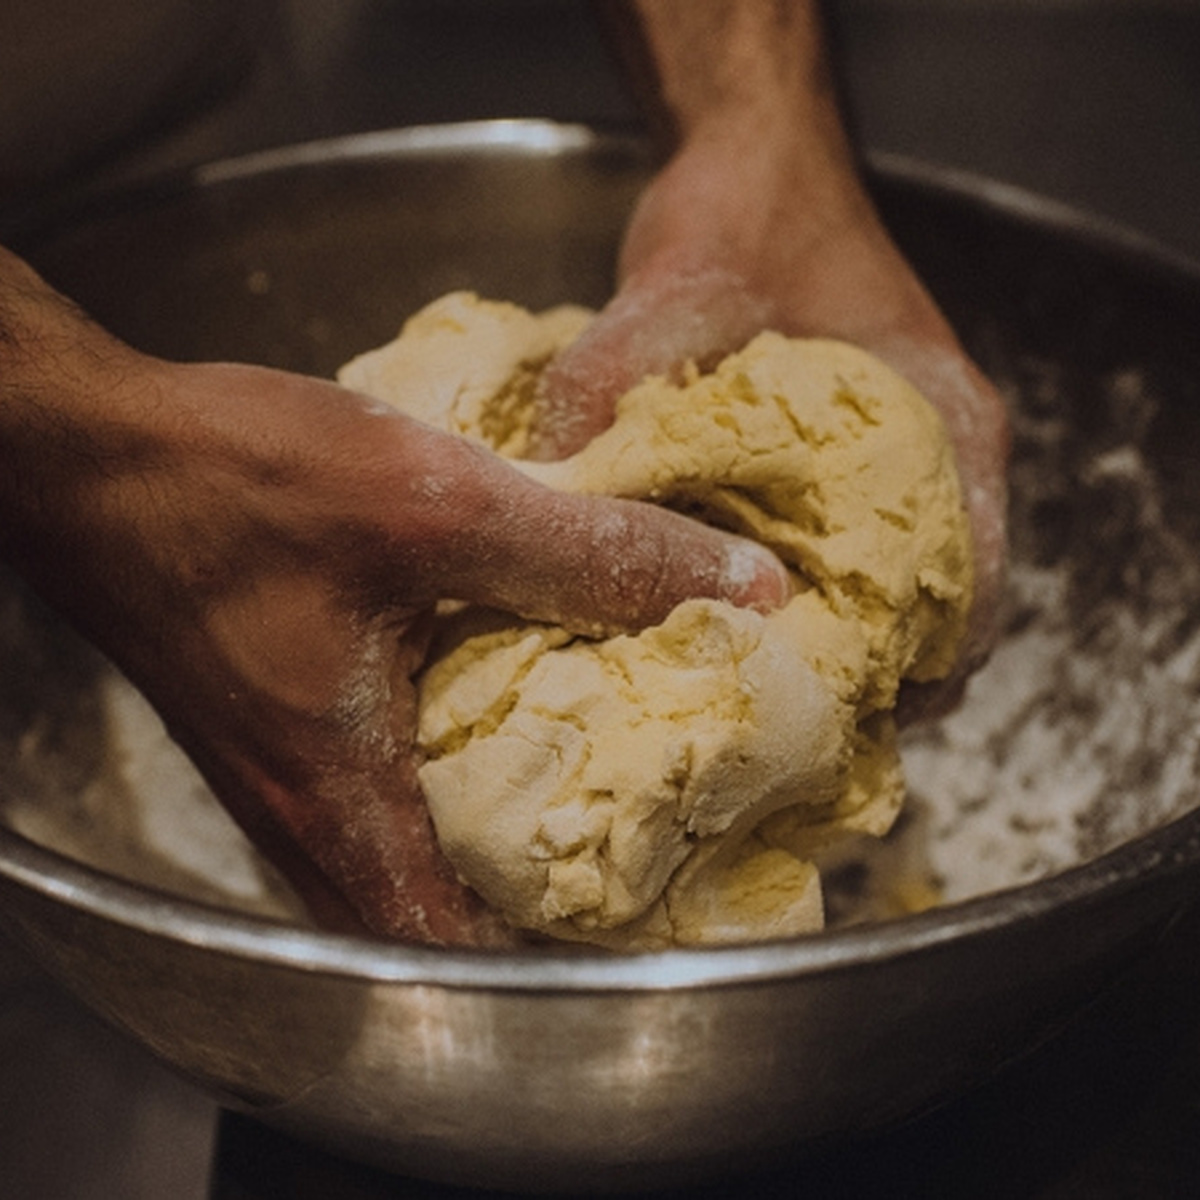 A pair of hands knead dough in a silver bowl.